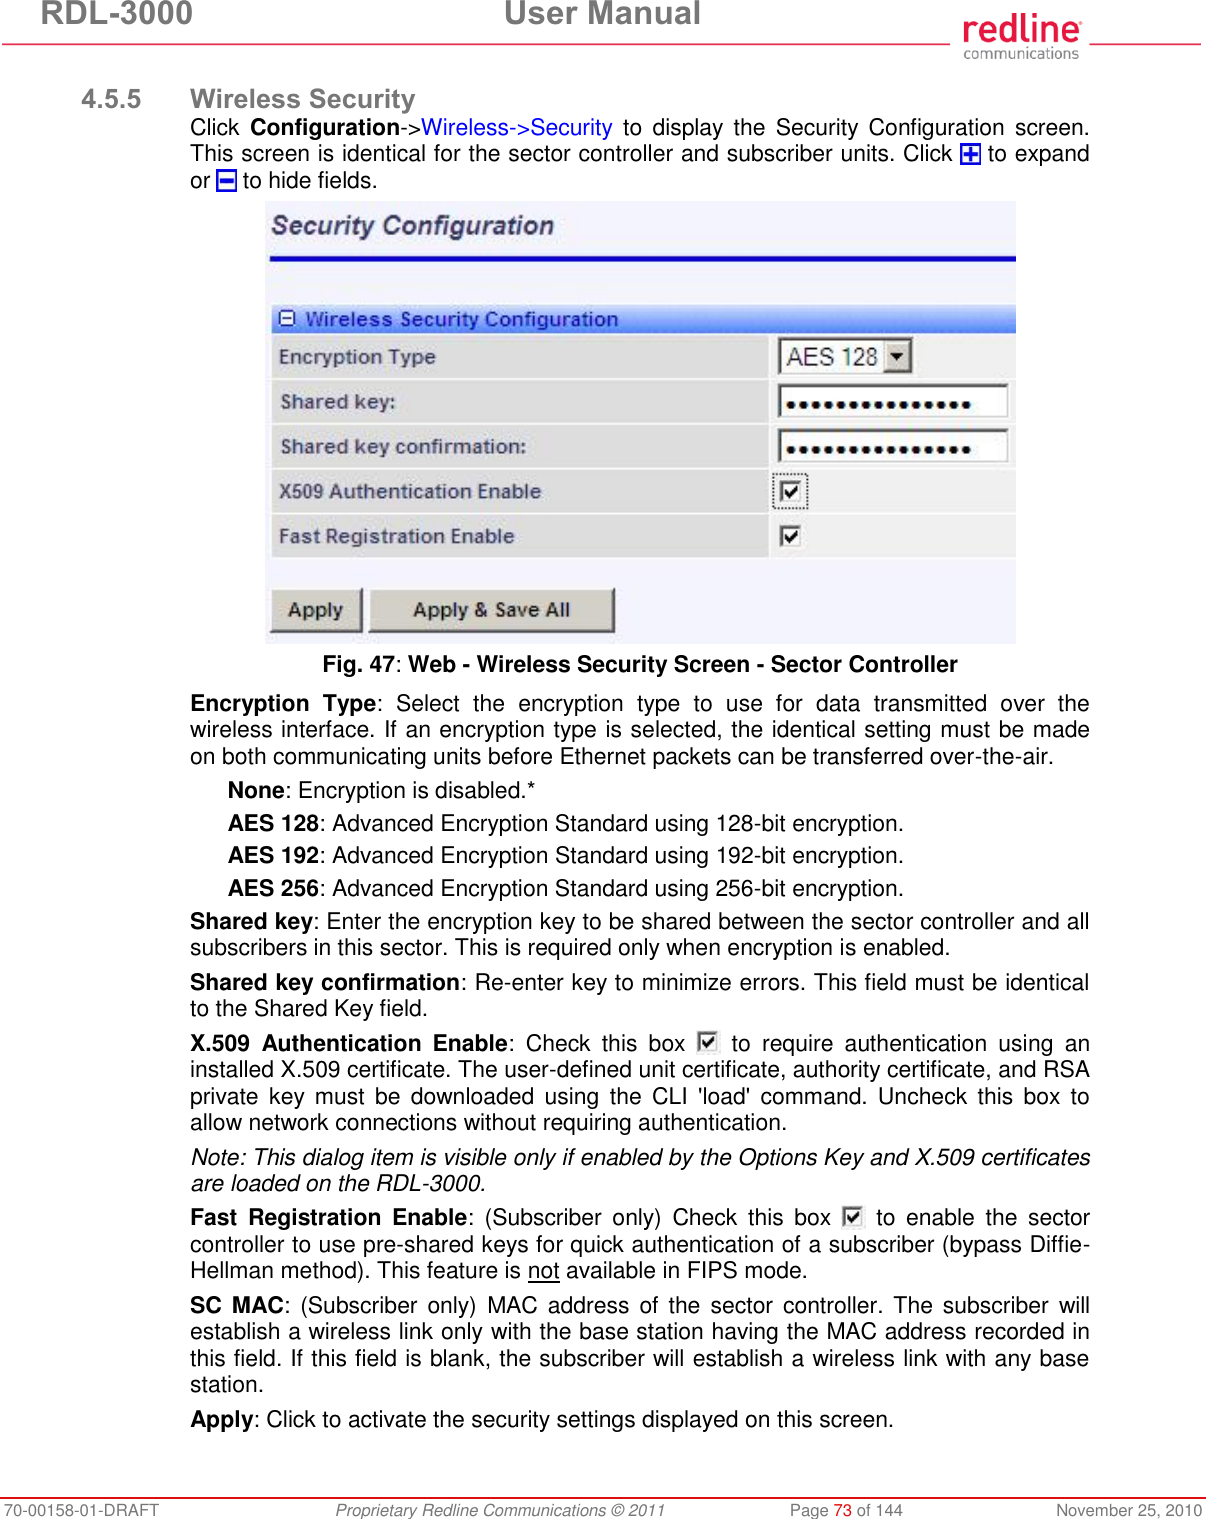 RDL-3000  User Manual 70-00158-01-DRAFT  Proprietary Redline Communications © 2011  Page 73 of 144  November 25, 2010  4.5.5 Wireless Security Click  Configuration-&gt;Wireless-&gt;Security  to  display the  Security Configuration screen. This screen is identical for the sector controller and subscriber units. Click   to expand or   to hide fields.  Fig. 47: Web - Wireless Security Screen - Sector Controller Encryption  Type:  Select  the  encryption  type  to  use  for  data  transmitted  over  the wireless interface. If an encryption type is selected, the identical setting must be made on both communicating units before Ethernet packets can be transferred over-the-air. None: Encryption is disabled.* AES 128: Advanced Encryption Standard using 128-bit encryption. AES 192: Advanced Encryption Standard using 192-bit encryption. AES 256: Advanced Encryption Standard using 256-bit encryption. Shared key: Enter the encryption key to be shared between the sector controller and all subscribers in this sector. This is required only when encryption is enabled. Shared key confirmation: Re-enter key to minimize errors. This field must be identical to the Shared Key field. X.509  Authentication  Enable:  Check  this  box    to  require  authentication  using  an installed X.509 certificate. The user-defined unit certificate, authority certificate, and RSA private  key  must  be  downloaded using  the  CLI  &apos;load&apos;  command.  Uncheck  this  box  to allow network connections without requiring authentication. Note: This dialog item is visible only if enabled by the Options Key and X.509 certificates are loaded on the RDL-3000. Fast  Registration  Enable:  (Subscriber  only)  Check  this  box    to  enable  the  sector controller to use pre-shared keys for quick authentication of a subscriber (bypass Diffie-Hellman method). This feature is not available in FIPS mode. SC MAC: (Subscriber only)  MAC address of  the sector  controller. The subscriber  will establish a wireless link only with the base station having the MAC address recorded in this field. If this field is blank, the subscriber will establish a wireless link with any base station. Apply: Click to activate the security settings displayed on this screen. 